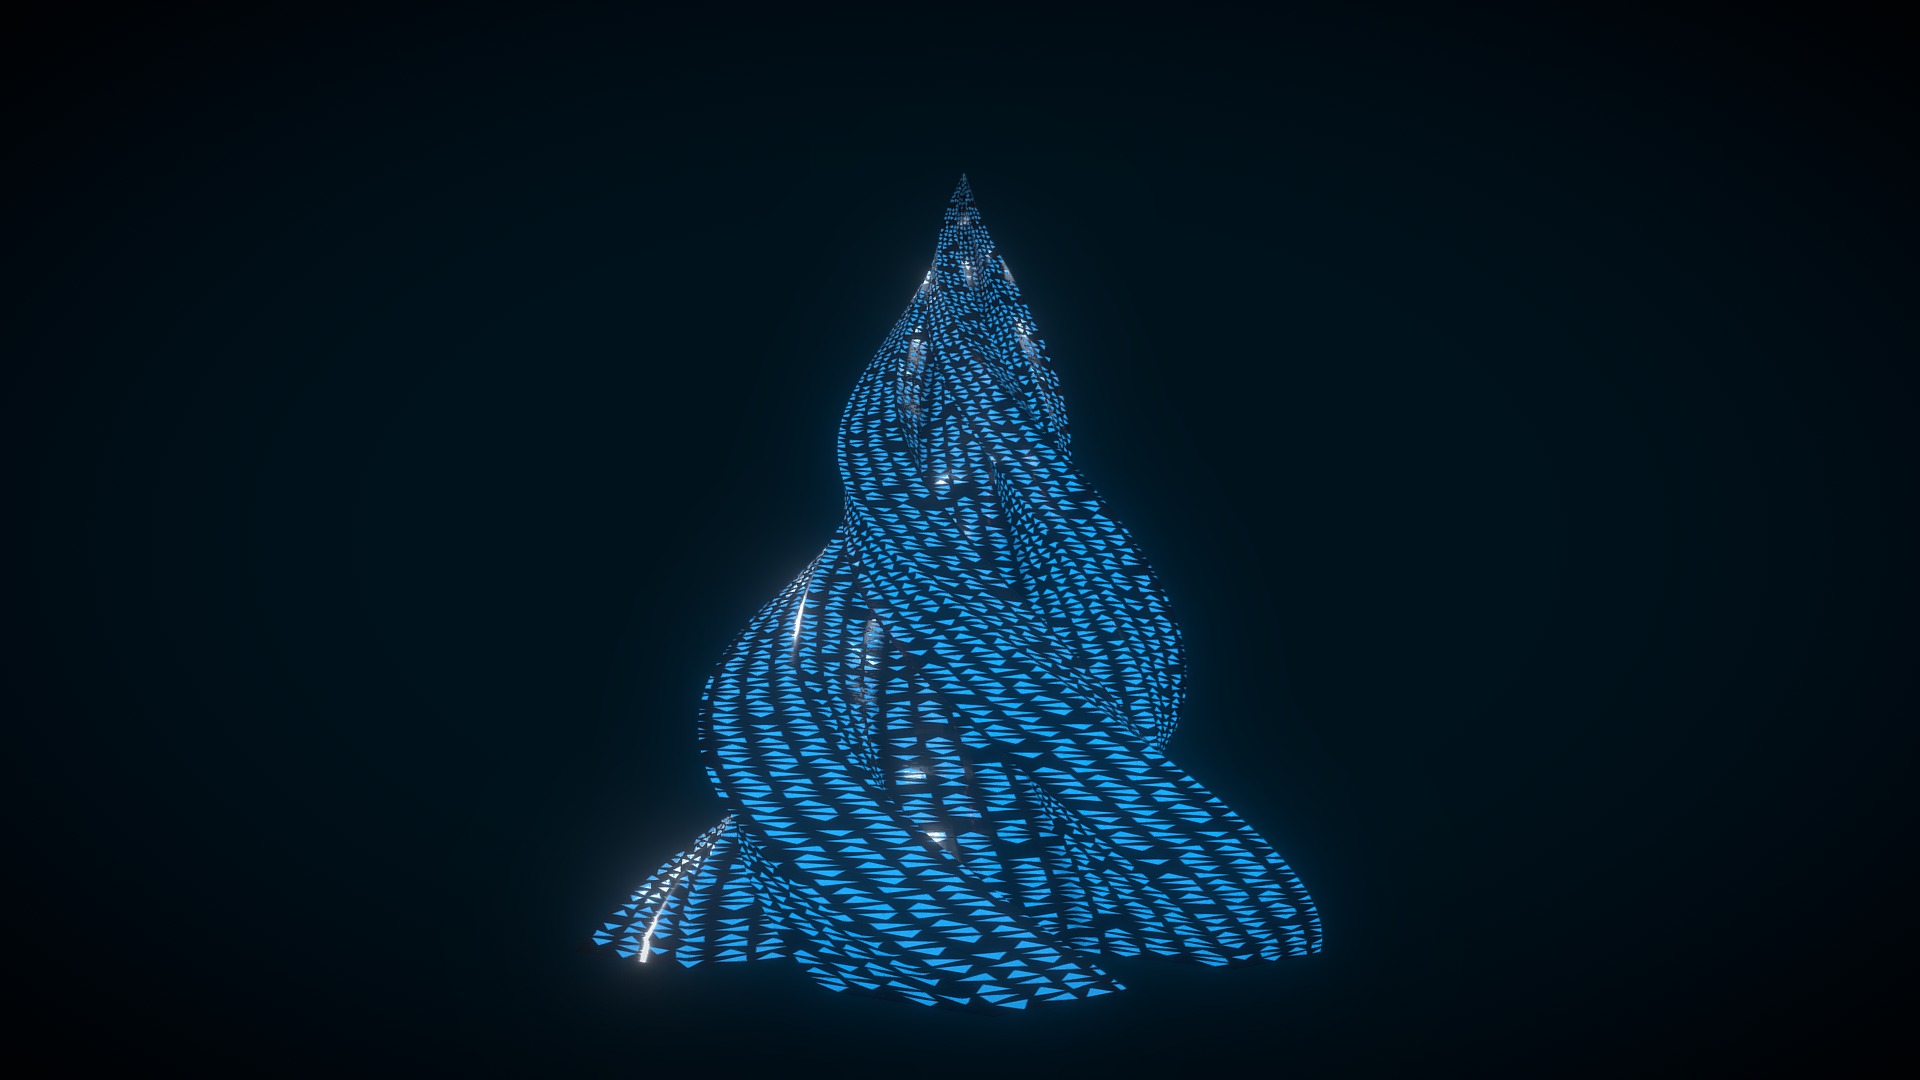 3D model Glowing Pyramid - This is a 3D model of the Glowing Pyramid. The 3D model is about a blue feather on a black background.